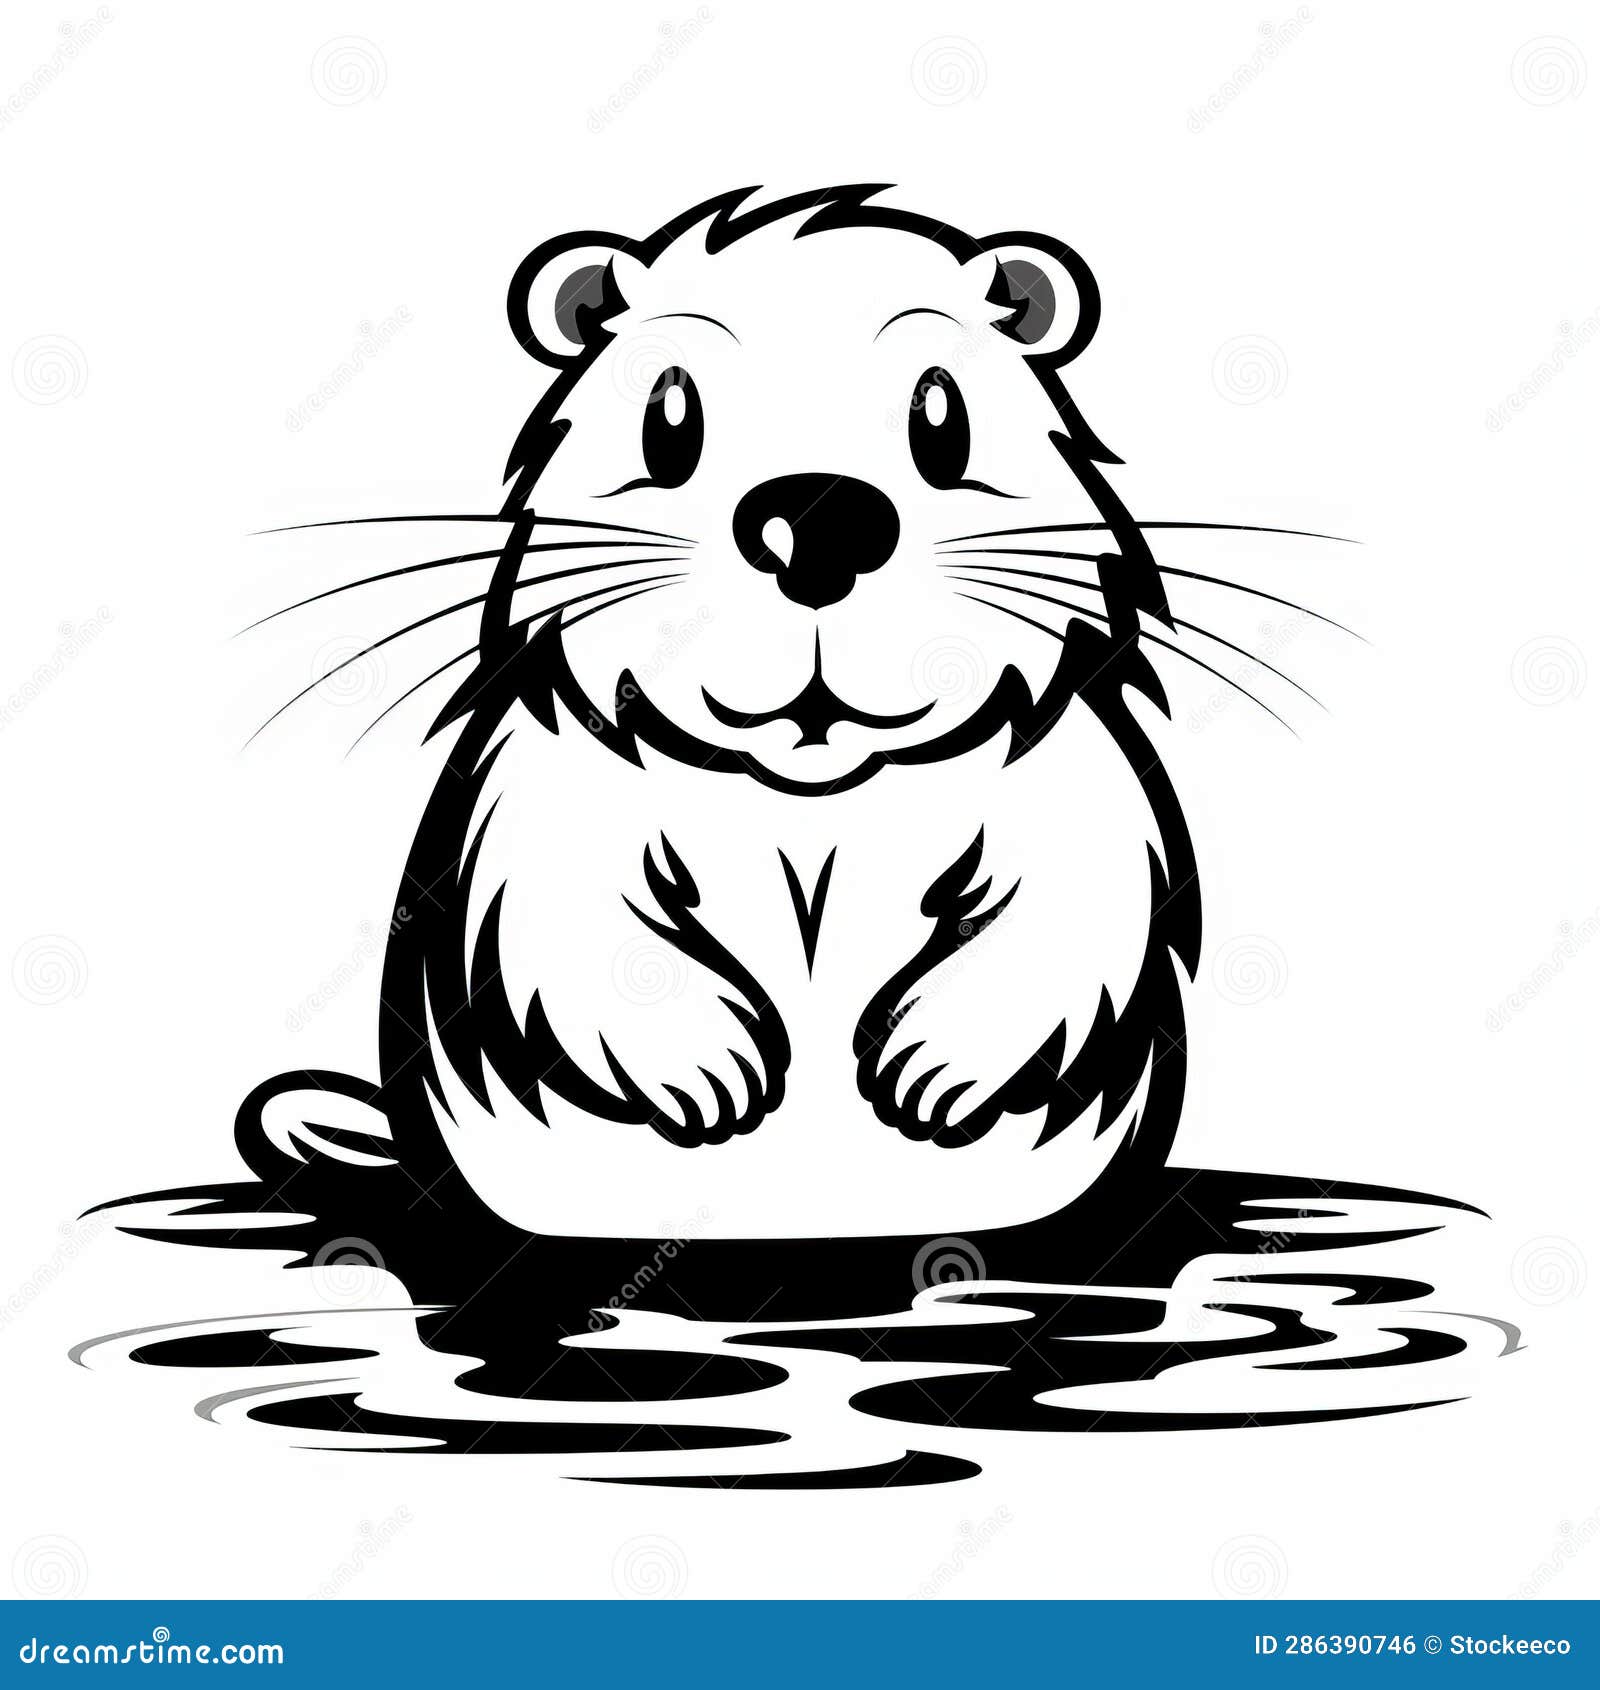 eye-catching black and white beaver  in flickr style